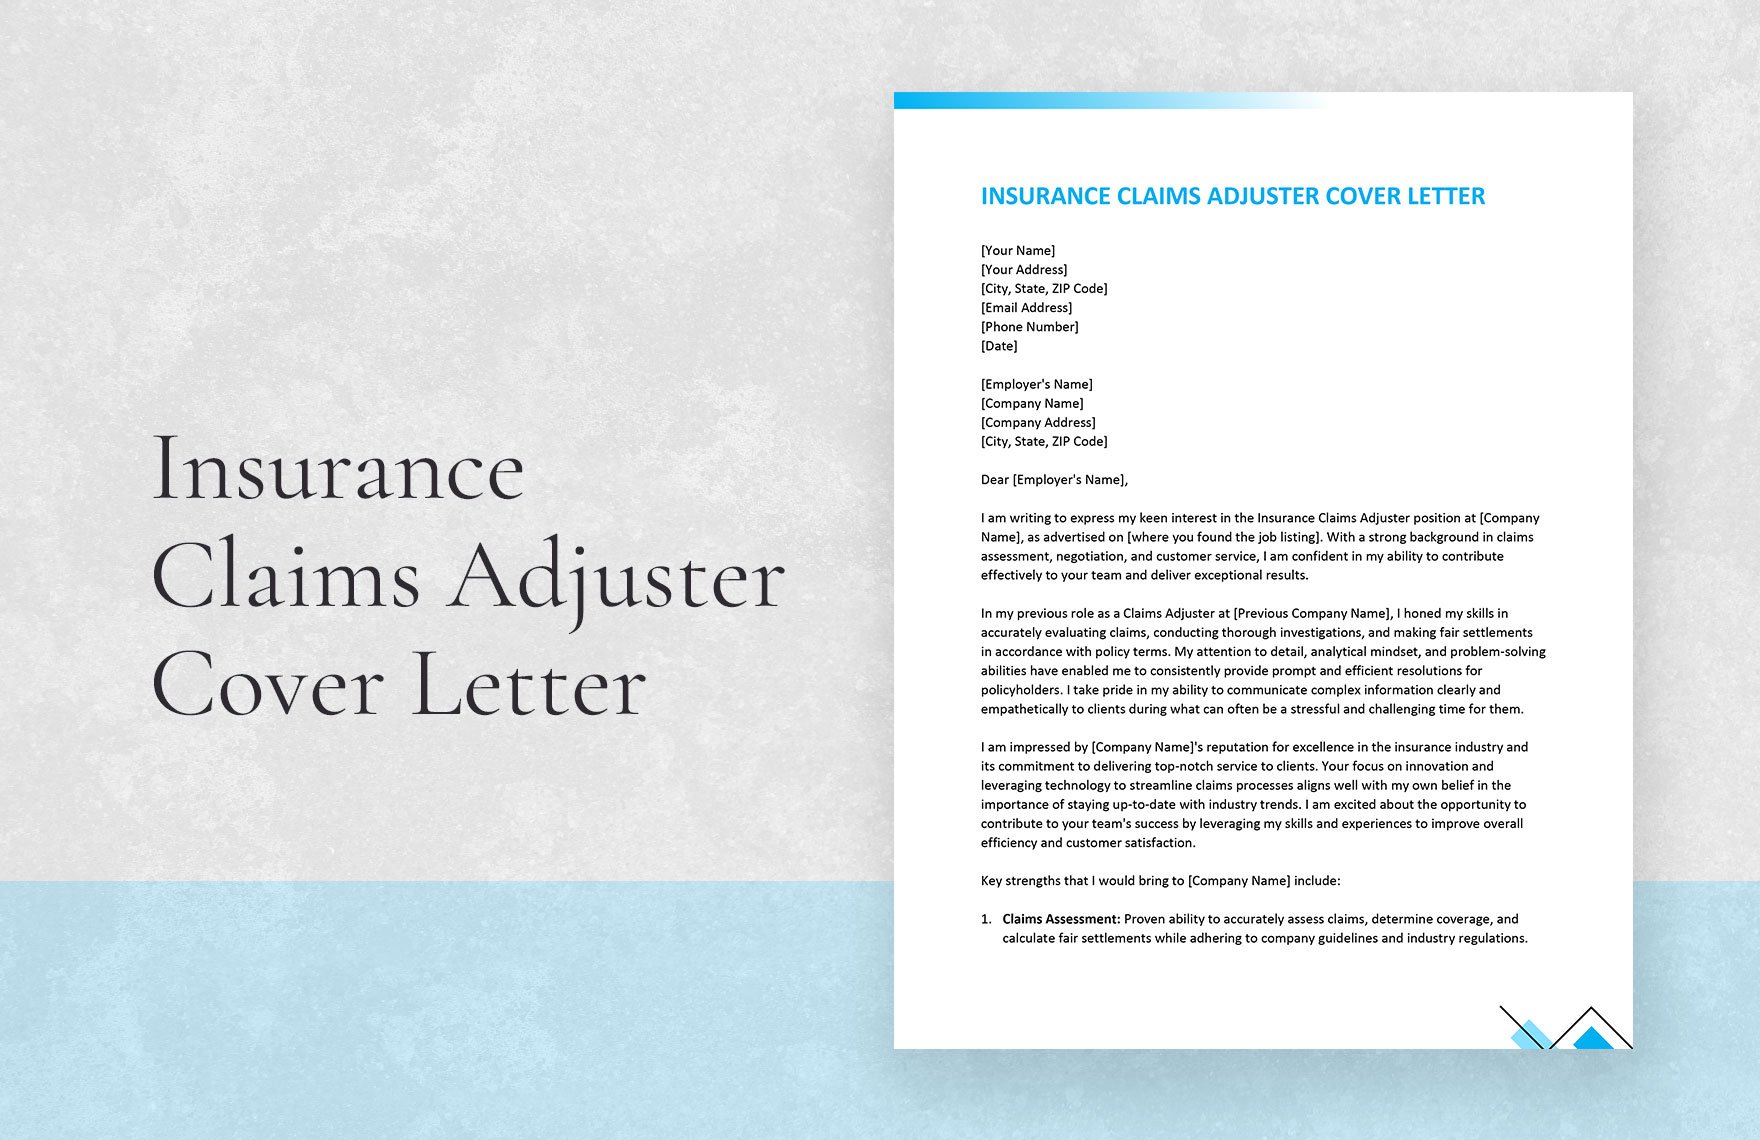 Insurance Claims Adjuster Cover Letter